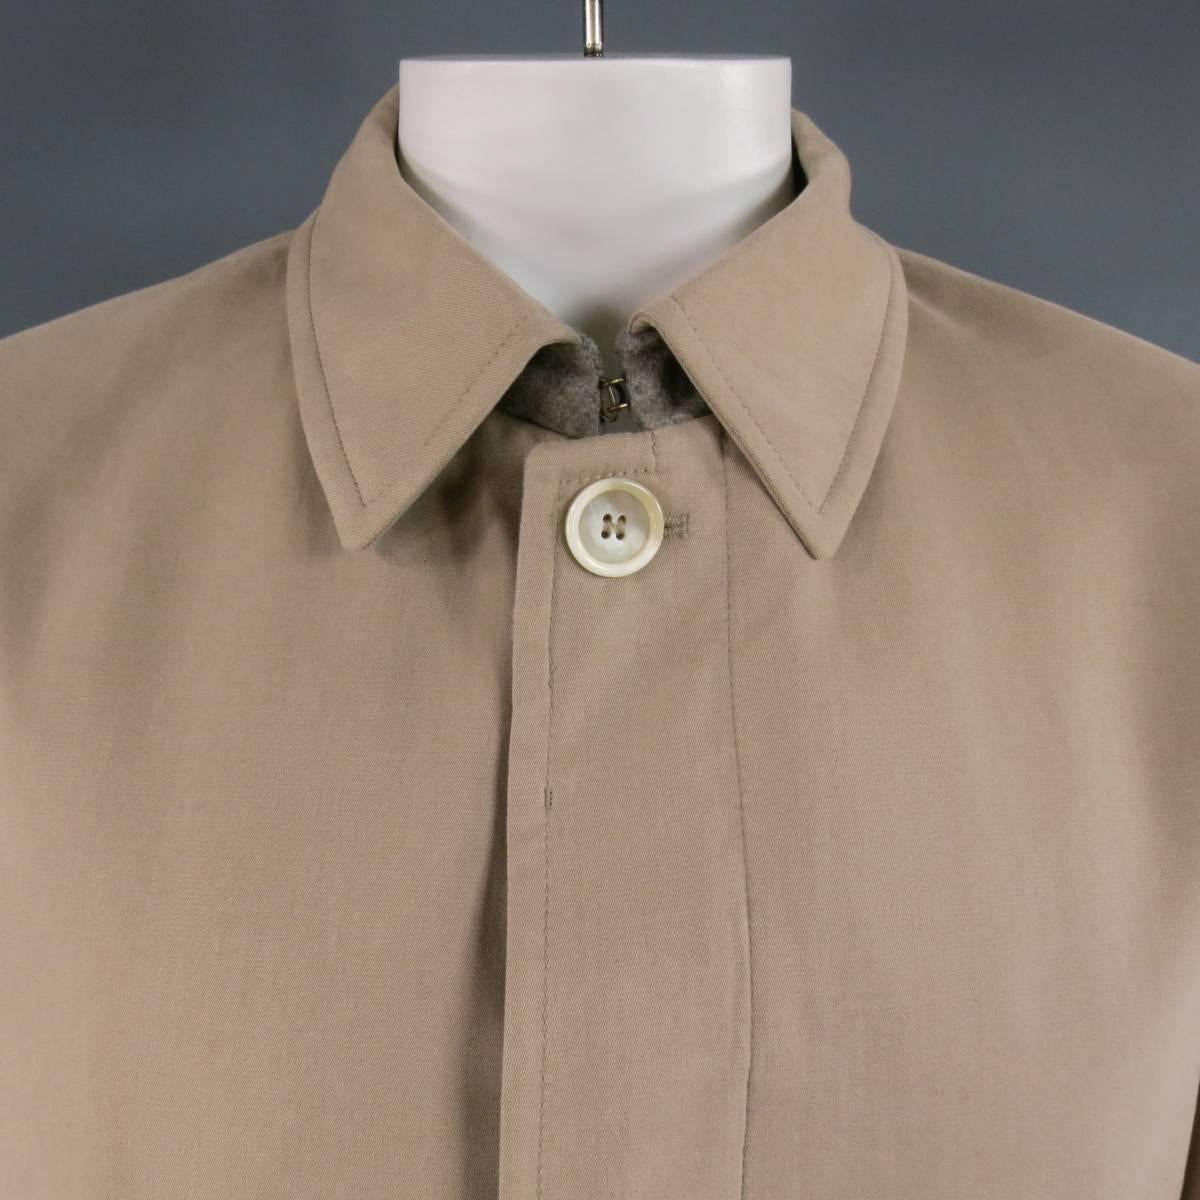 This classic BRUNELLO CUCINELLI light weight coat comes in a light brown beige cotton cashmere blend and features a pointed collar with Heather gray lining, button up and zip closure with hidden placket, vertical pockets, and flap pockets. Made in